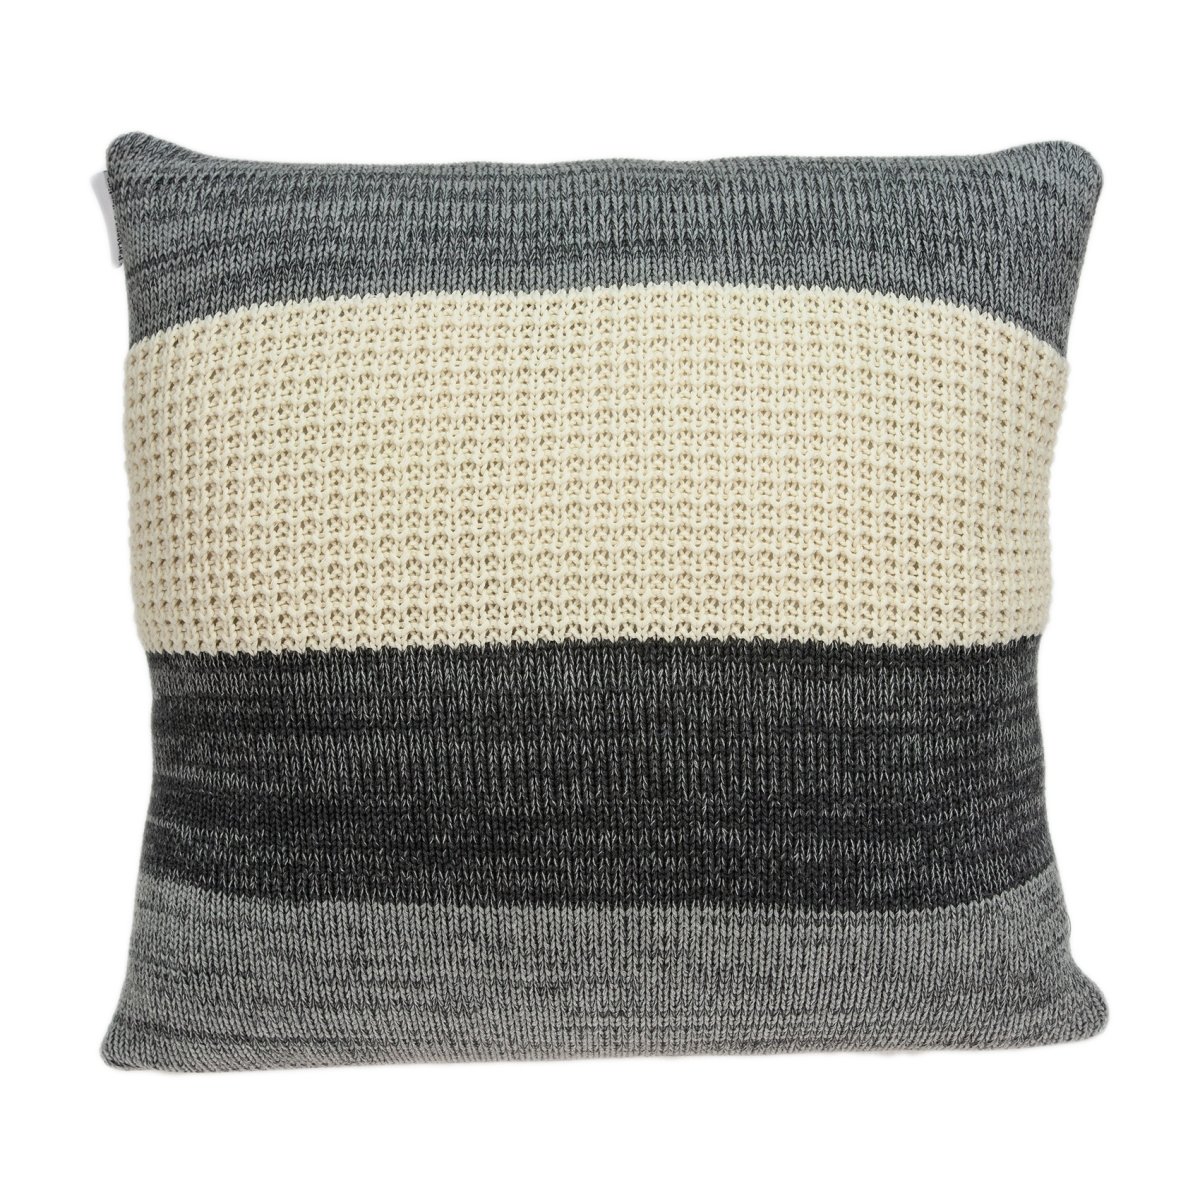 Pilb11043p Gio Grey & Tan Square Transitional Pillow Cover With Poly Insert - 20 X 20 X 7 In.